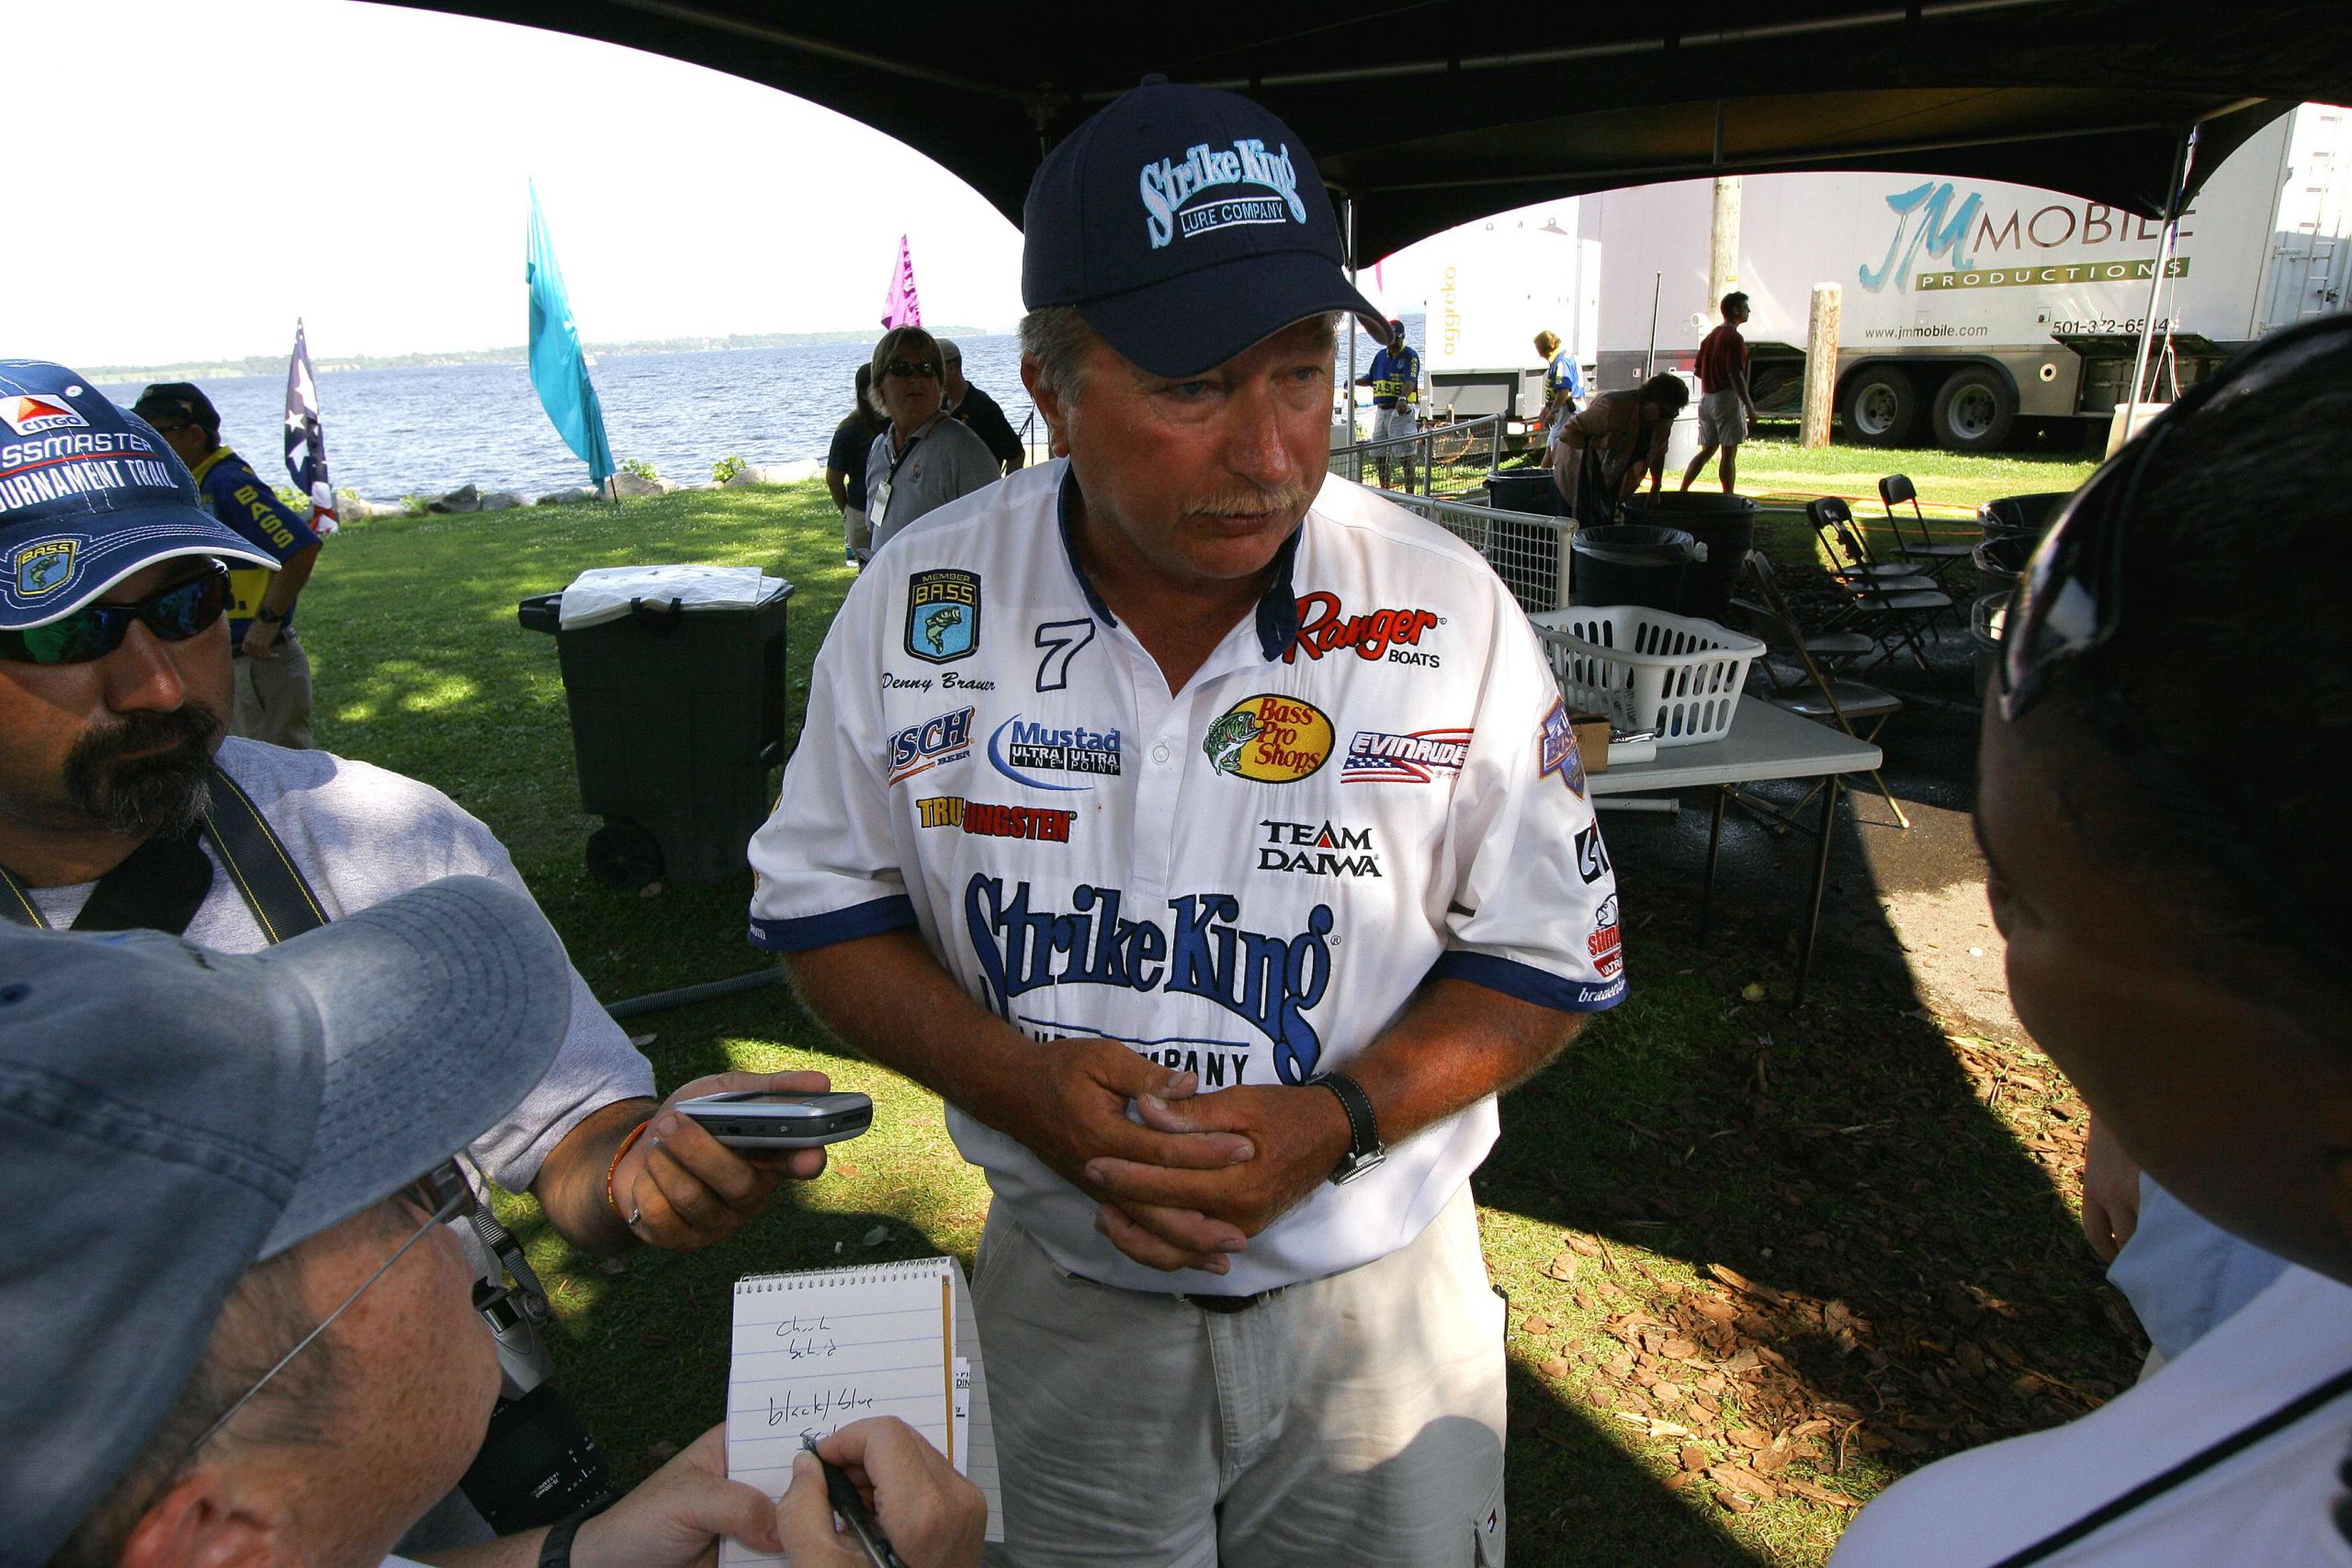 <p><b>Who were your favorite anglers to watch when you were younger? </p></b>
I have two anglers that I loved watching. The first was Denny Brauer because of the way he fished. I always thought the flipping and pitching was really cool and would try and mimic his style. He helped Mustad create their flipping hooks which Iâve caught countless fish with. The other angler was Rick Clunn simply because my first baitcasting reel was his signature series. So I always thought he was a cool cat. 
